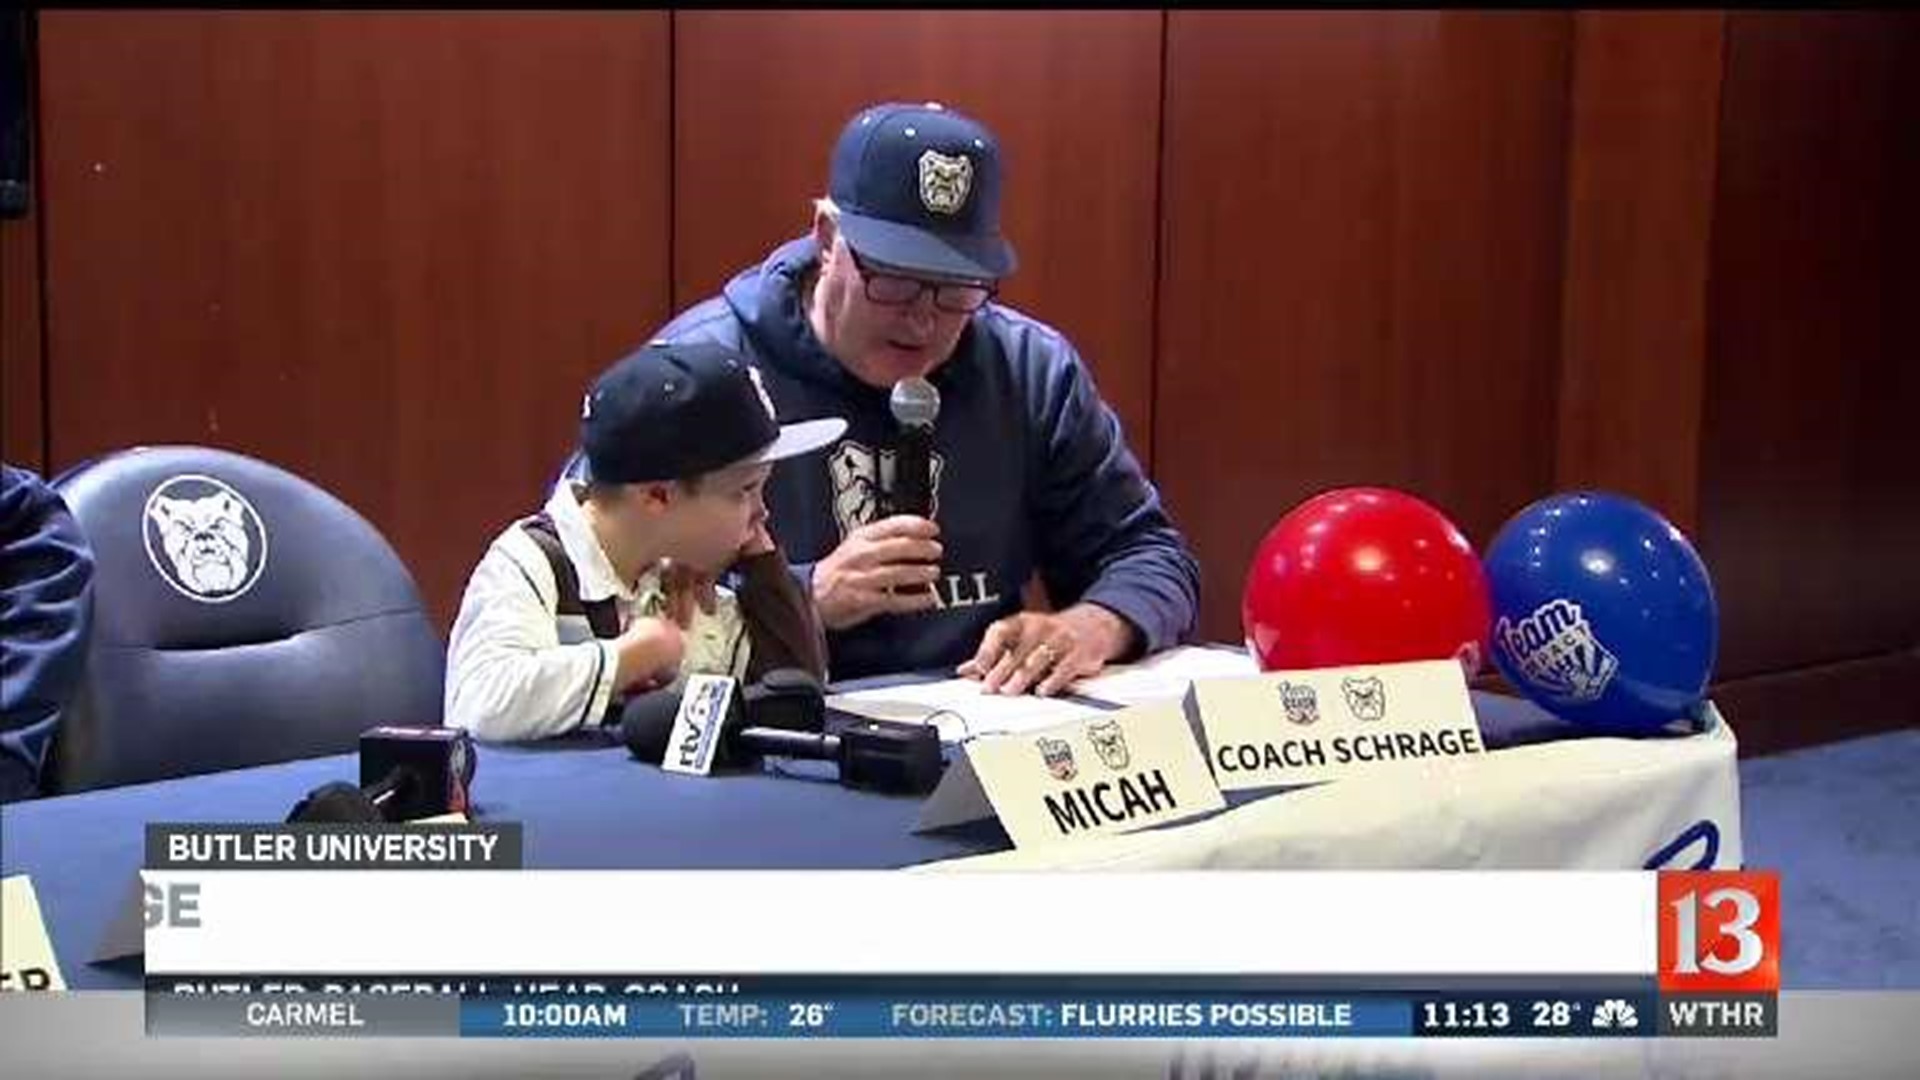 6 year old cancer survivor signs with the team